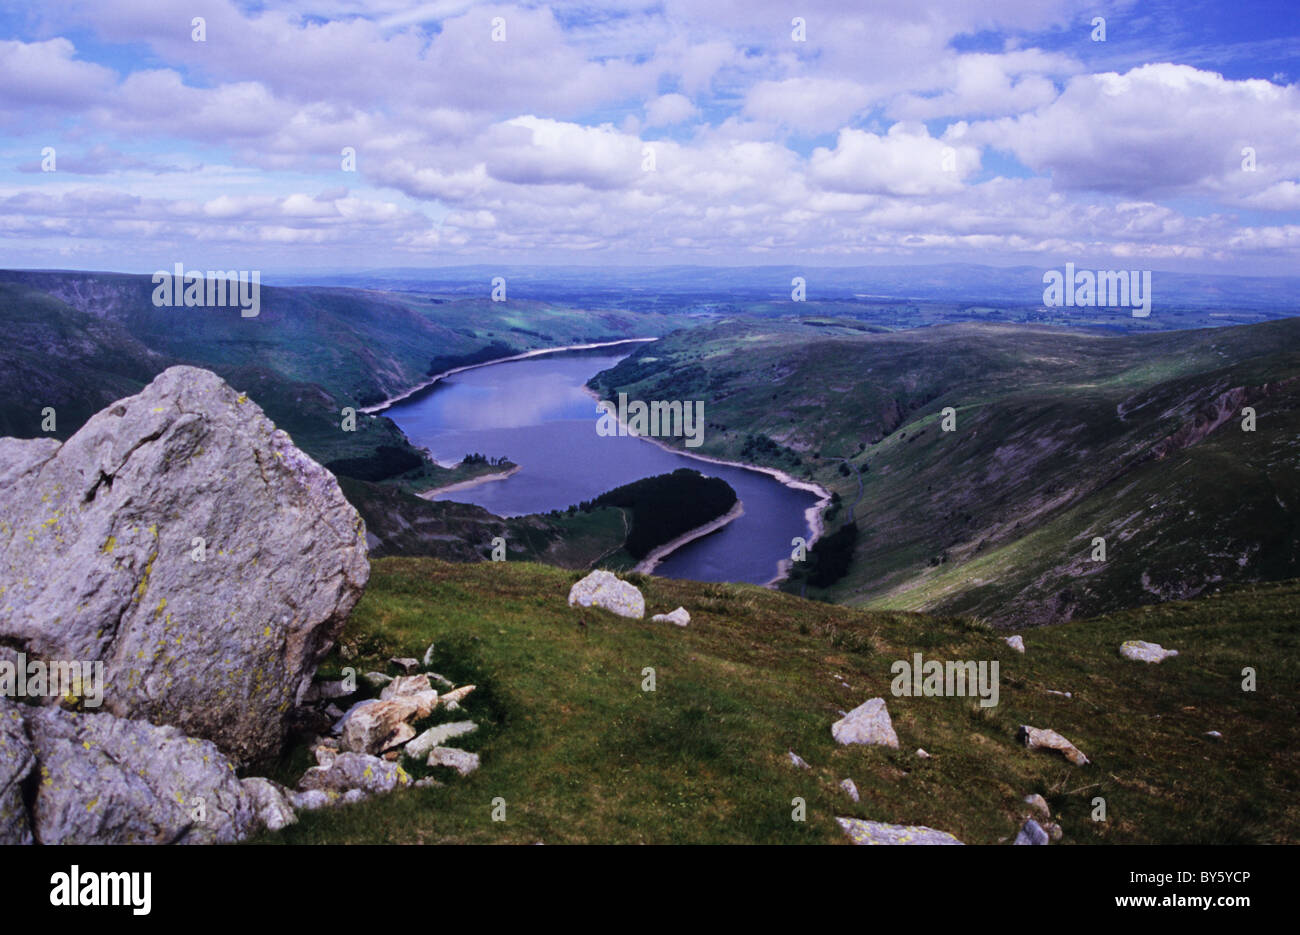 Haweswater Reservoir, from high on the fells. Wonderful scenery from up in the hills around Haweswater  reservoir. Stock Photo